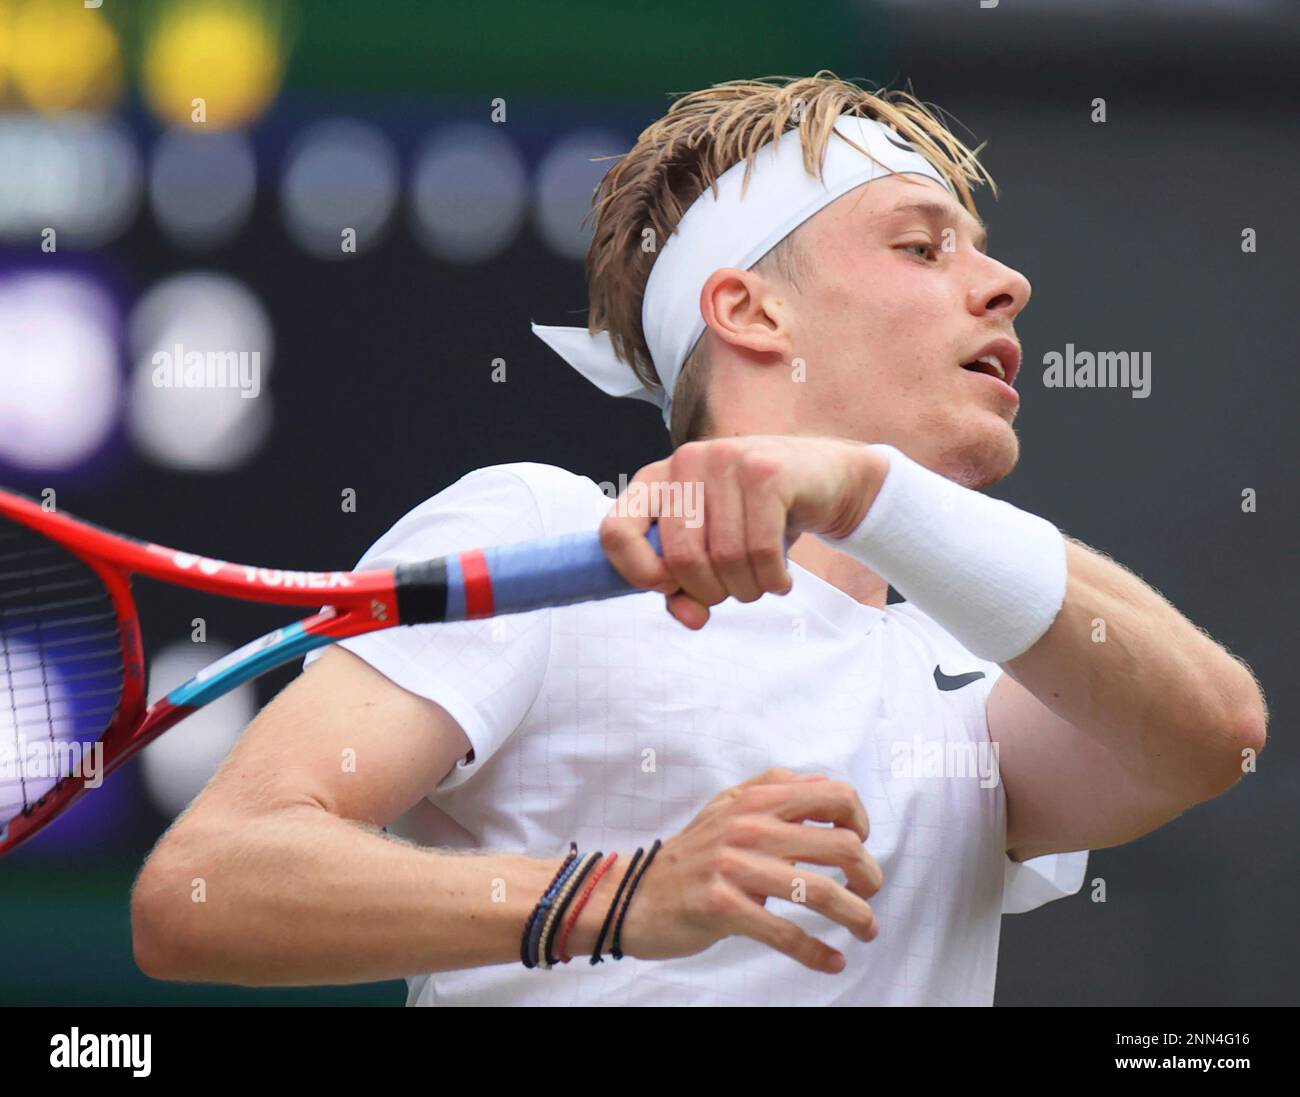 Denis Shapovalov of Canada hits a ball during the Mens singles third round of the Championships, Wimbledon against Andy Murry of United Kingdom at the All England Lawn Tennis and Croquet Club